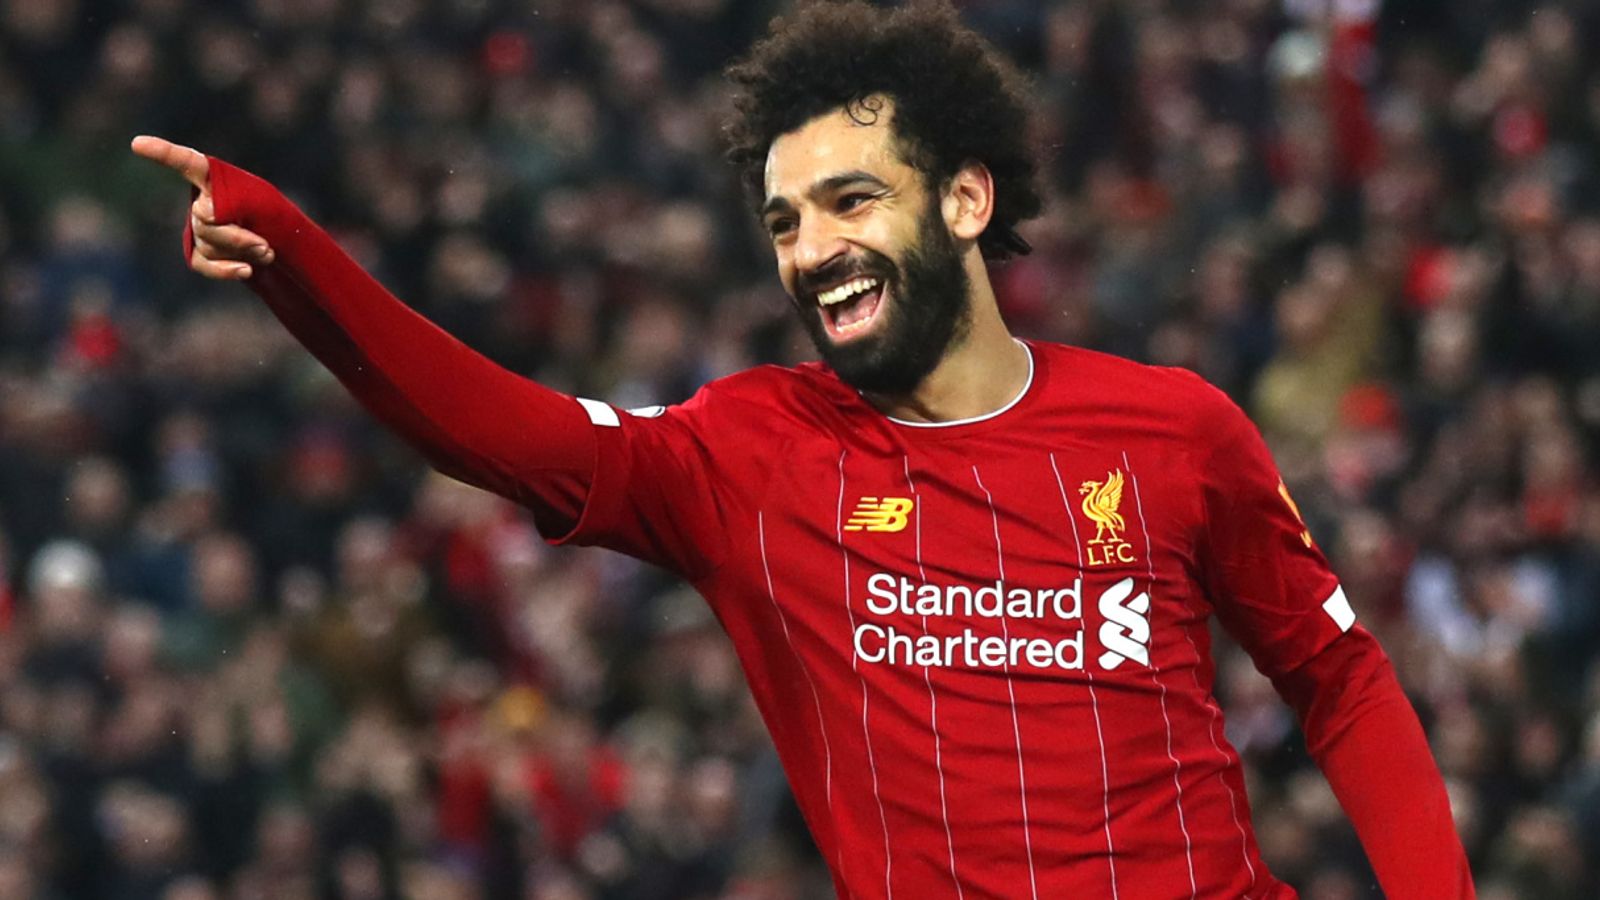 Mohamed Salah and Liverpool have final say over 2020 Olympics, says Egypt coach